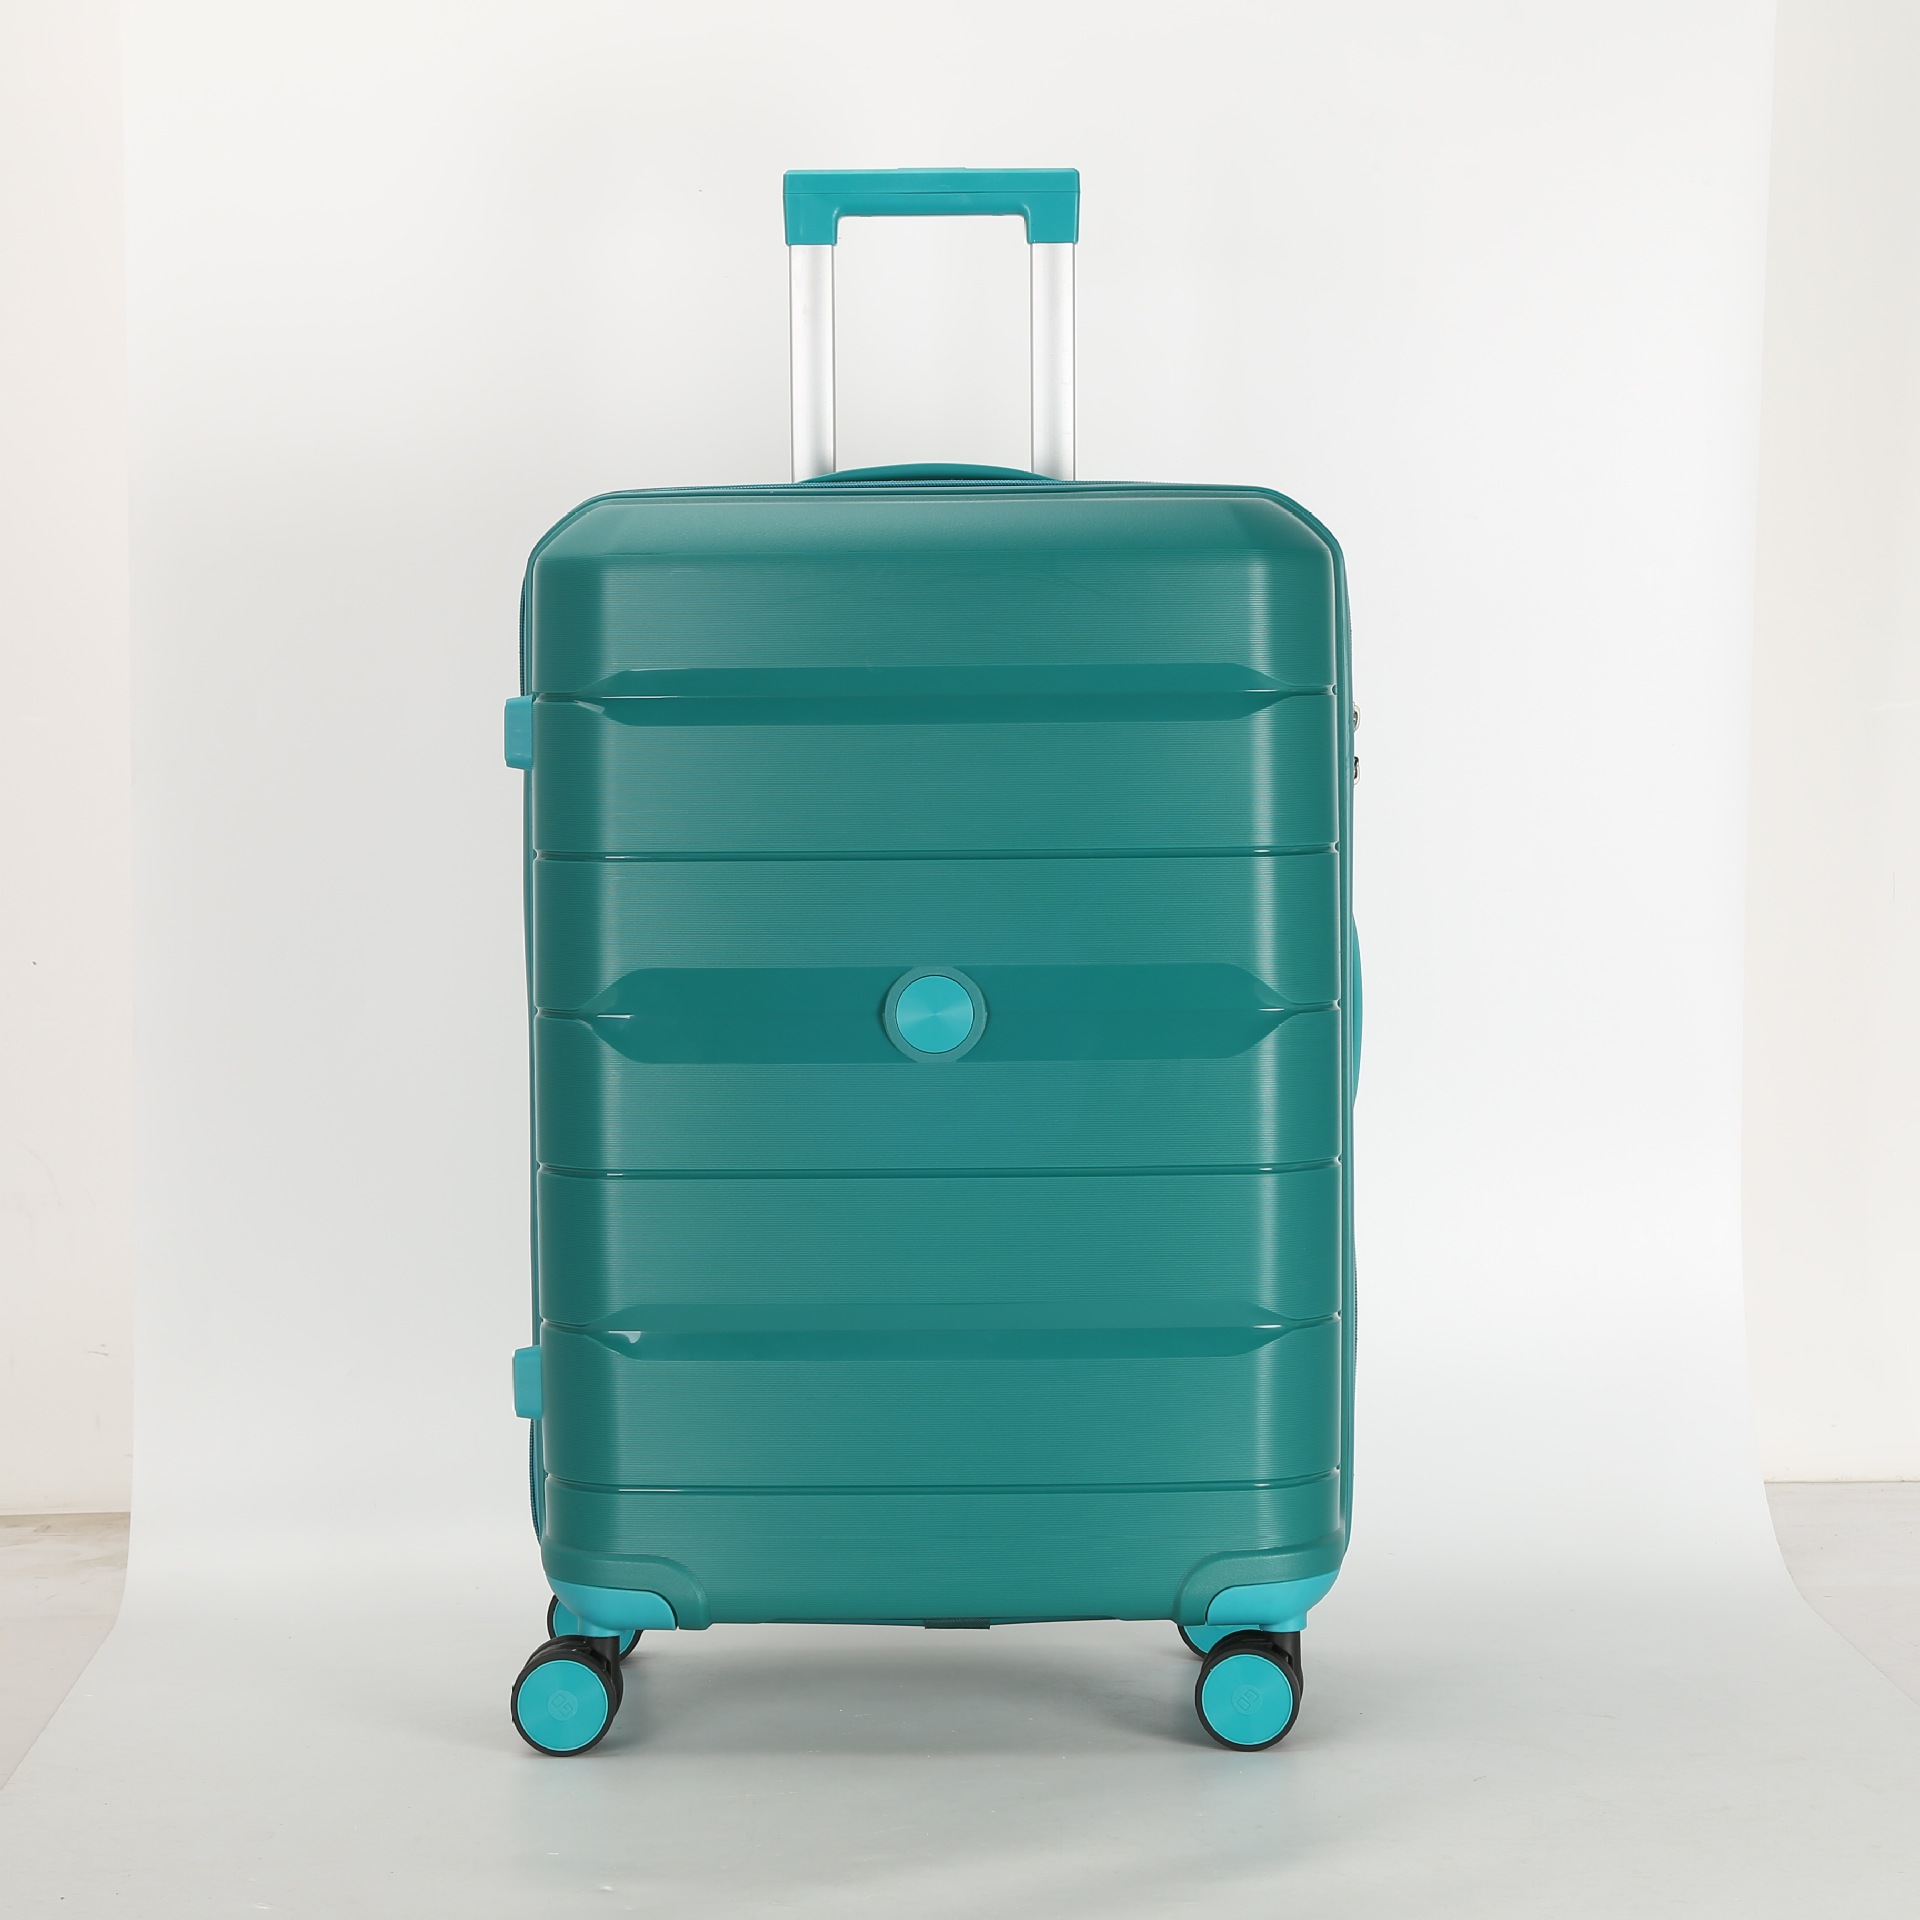 Pp Luggage and Suitcase Trolley Case Export Suit Luggage Three-Piece Luggage Set Source Factory Wholesale Suitcase